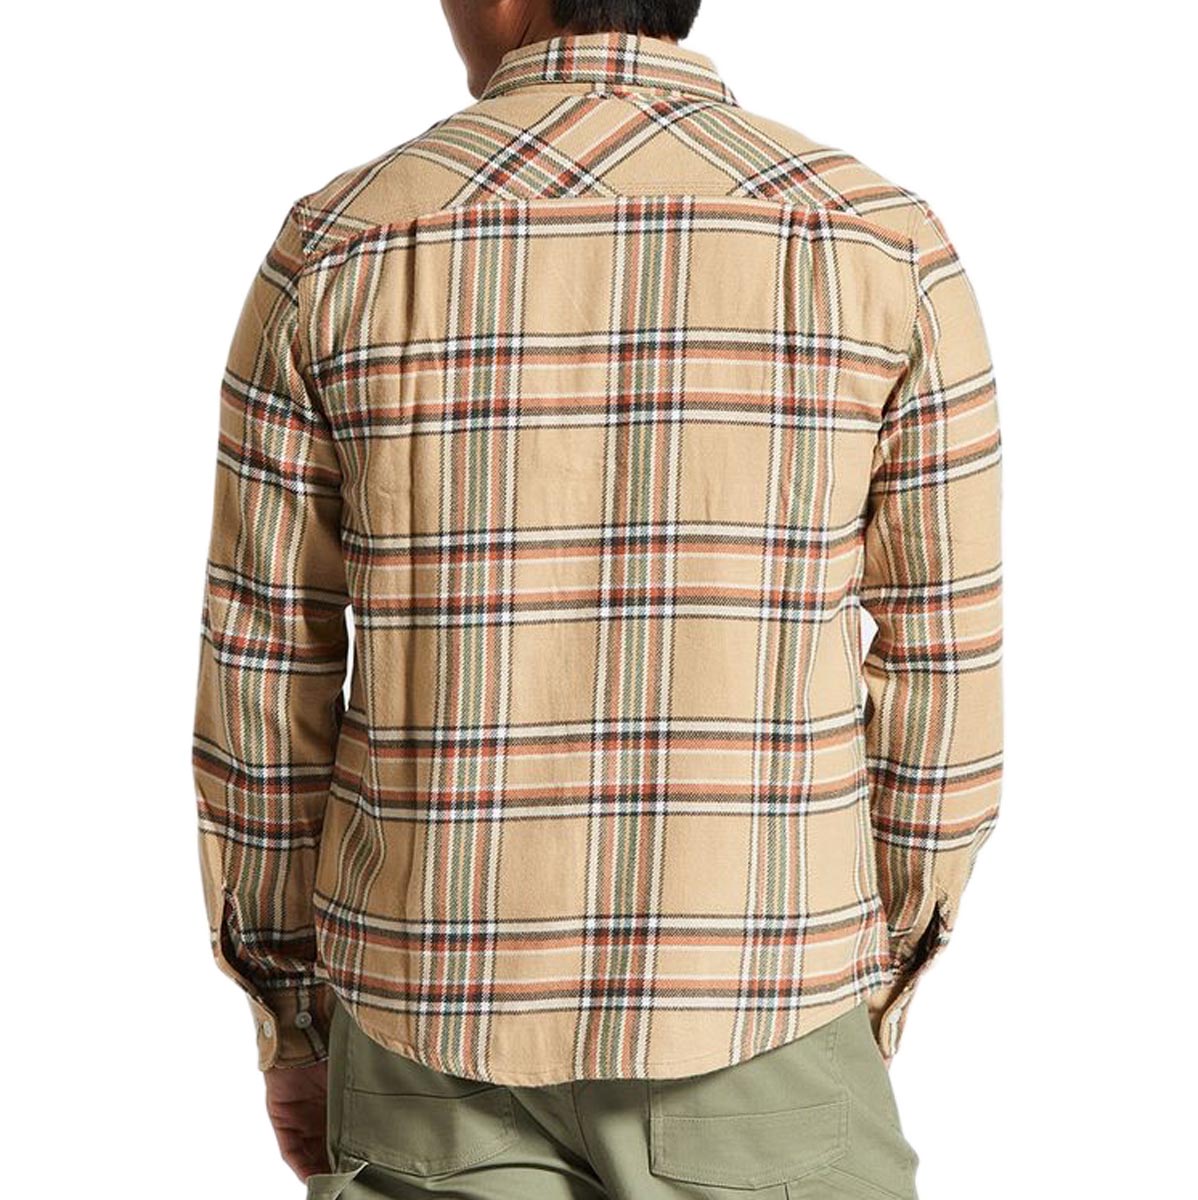 Brixton Bowery Flannel Long Sleeve Shirt - Sand/Off White/Terracotta image 2